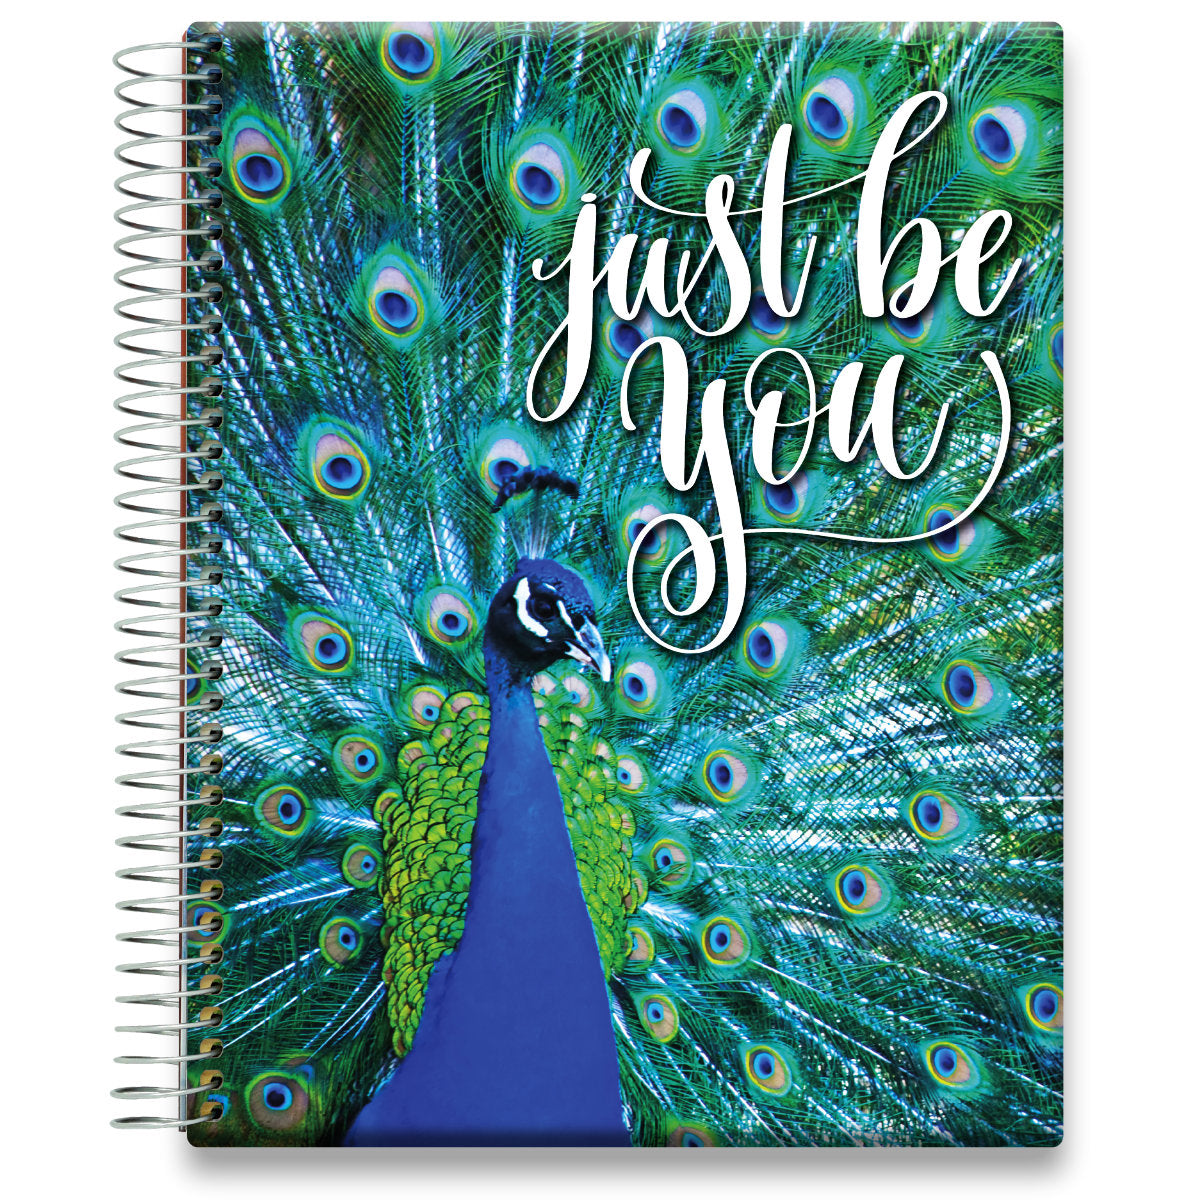 Oct 2024 to Dec 2025 Planner - Peacock w Quote